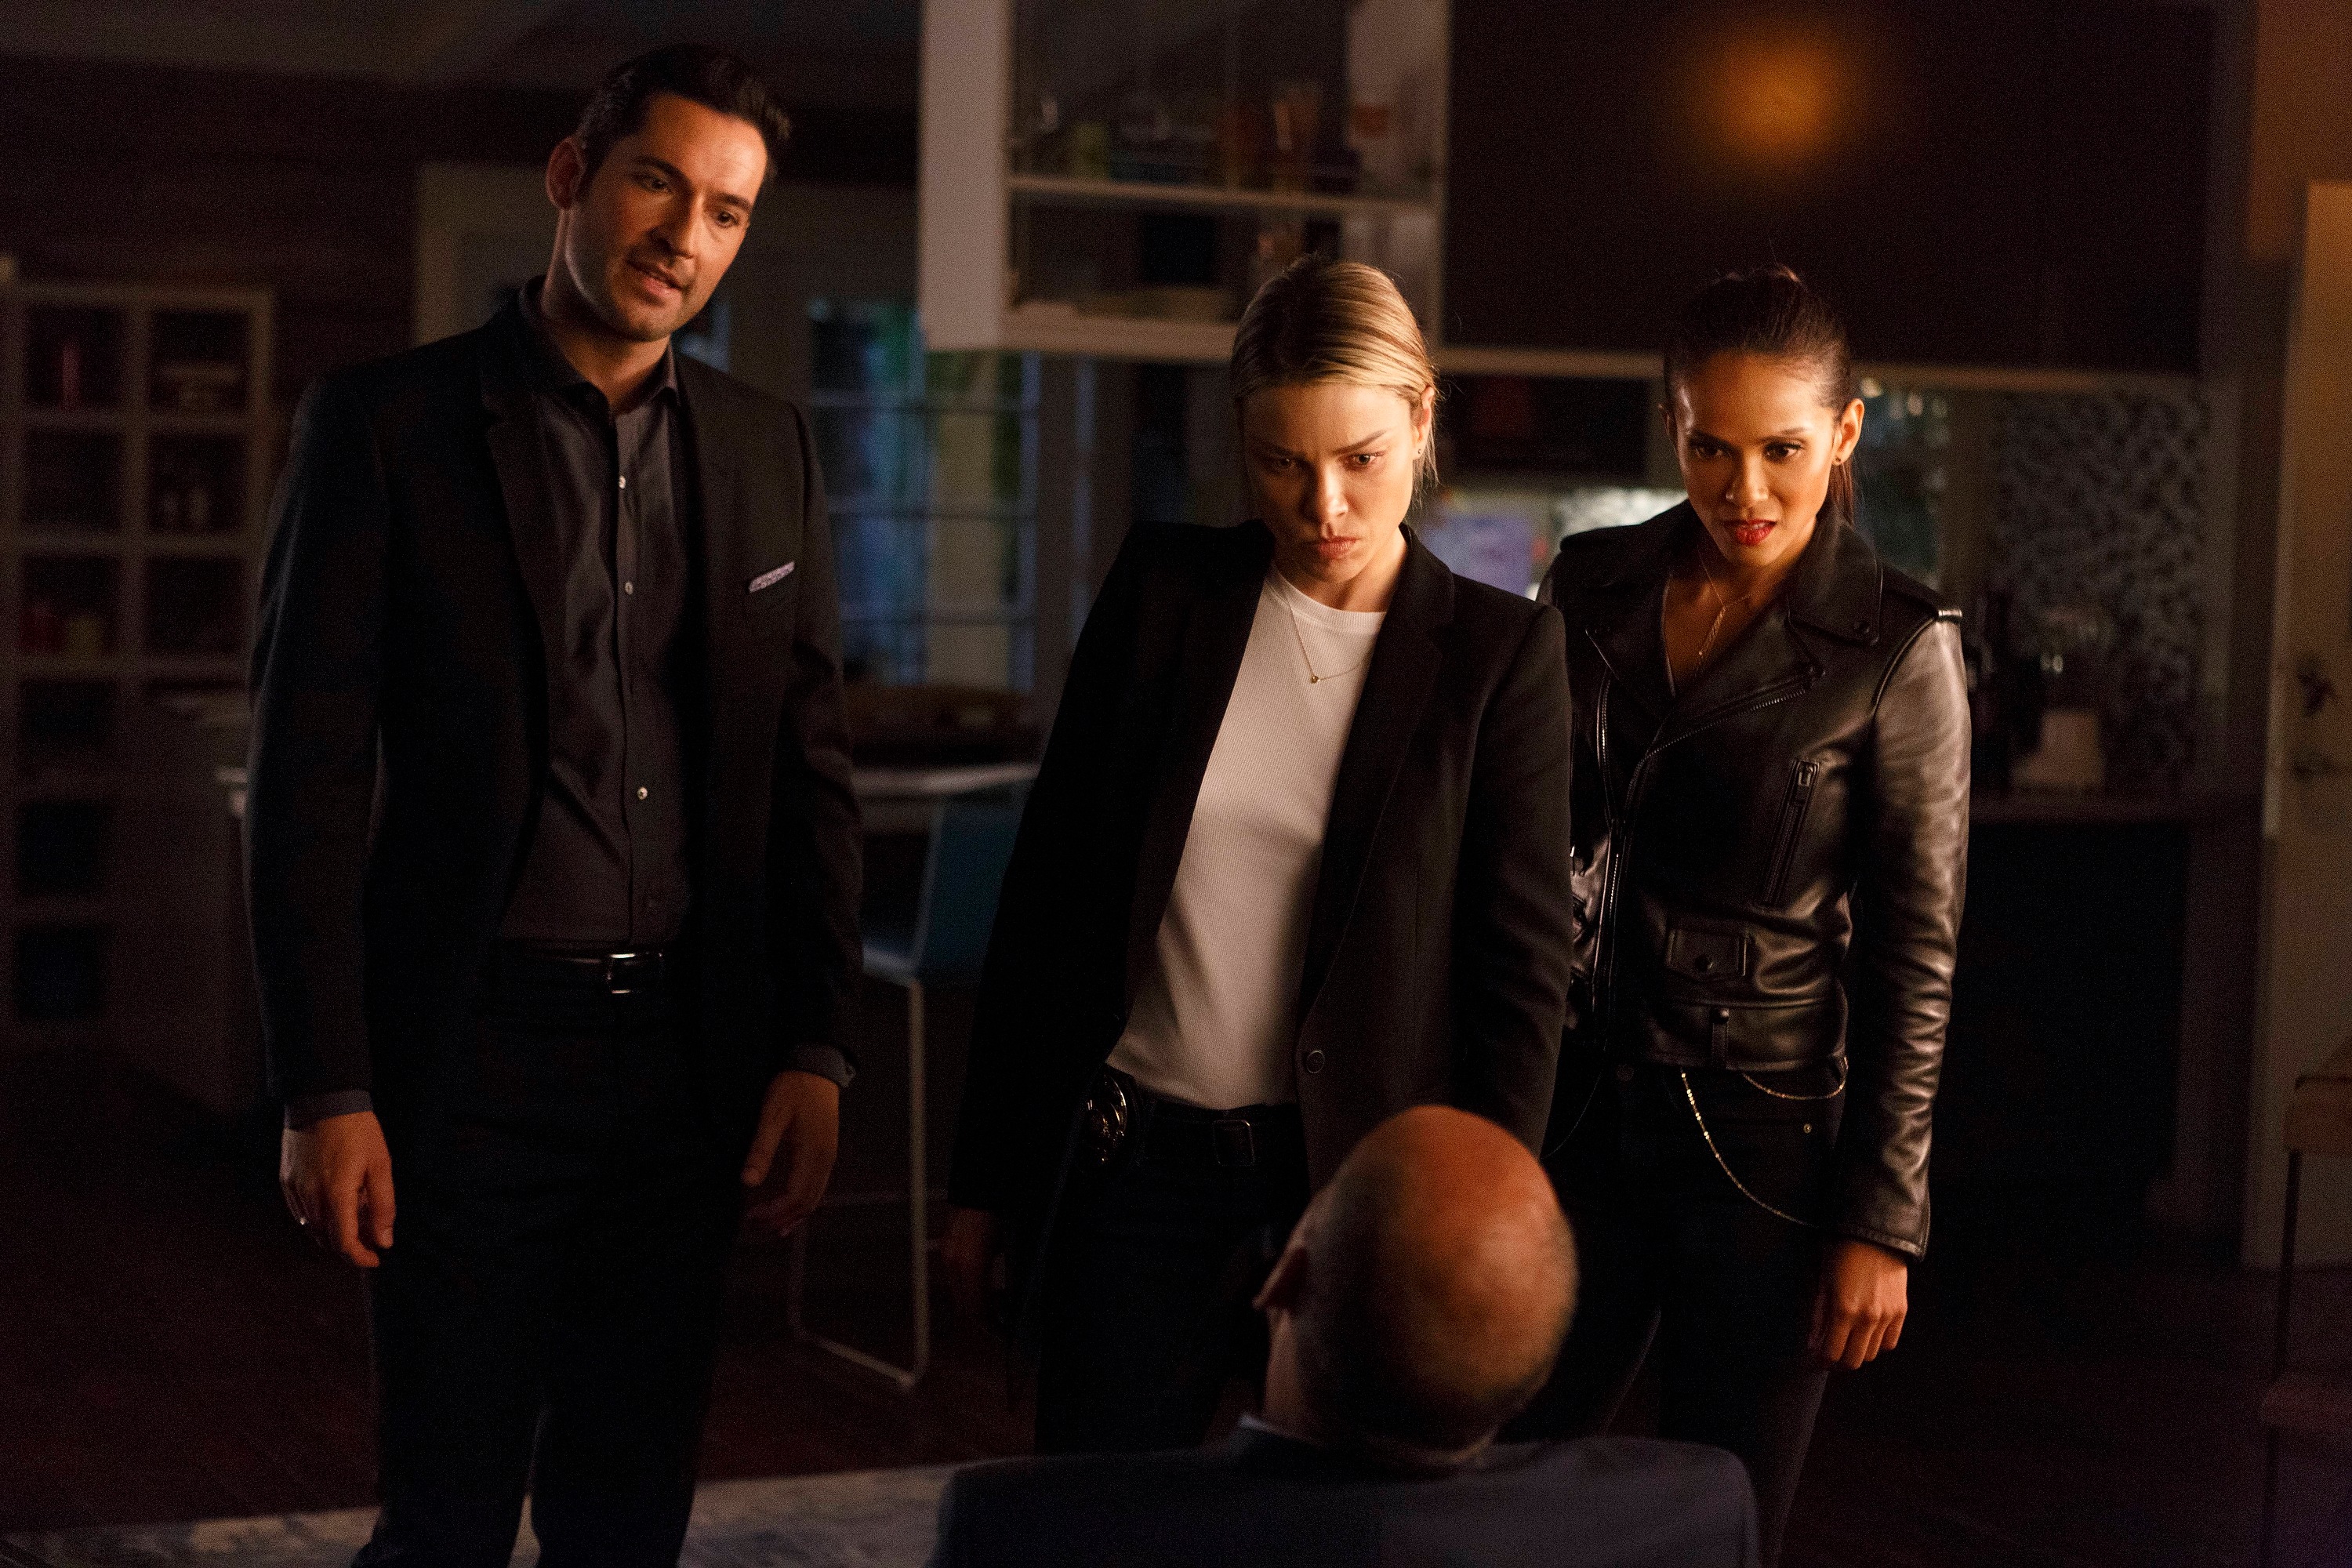 Lucifer, Chloe and Maze of 'Lucifer' looking at a suspect